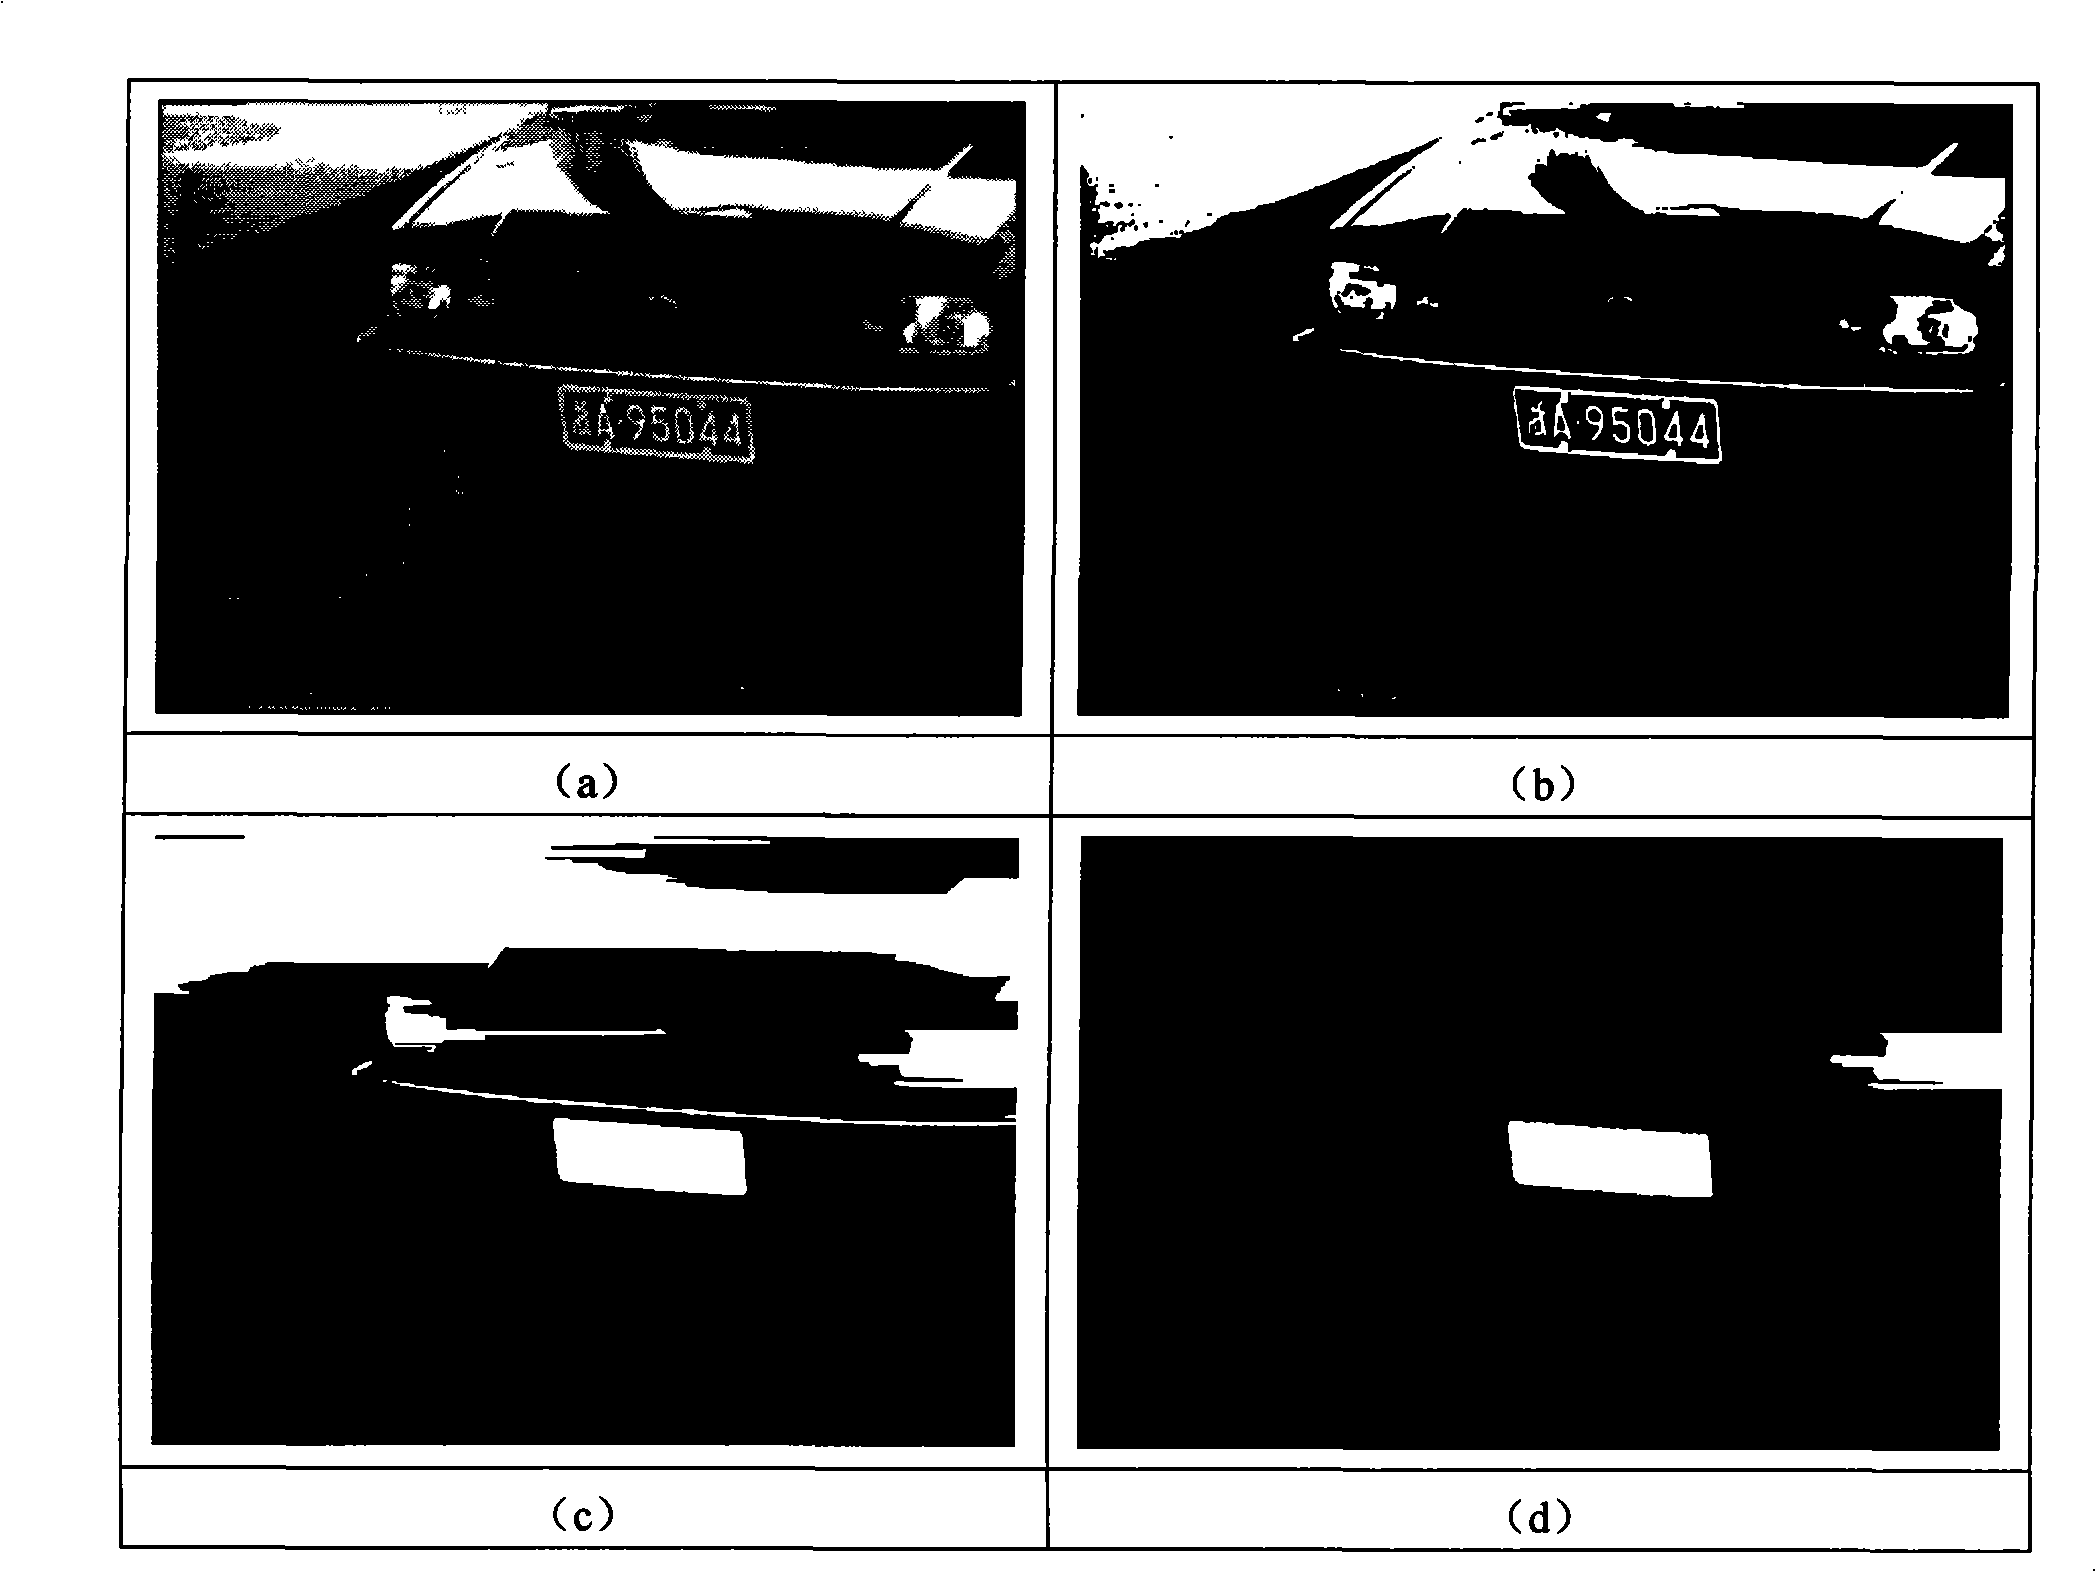 Method for locating license plate under a complicated background